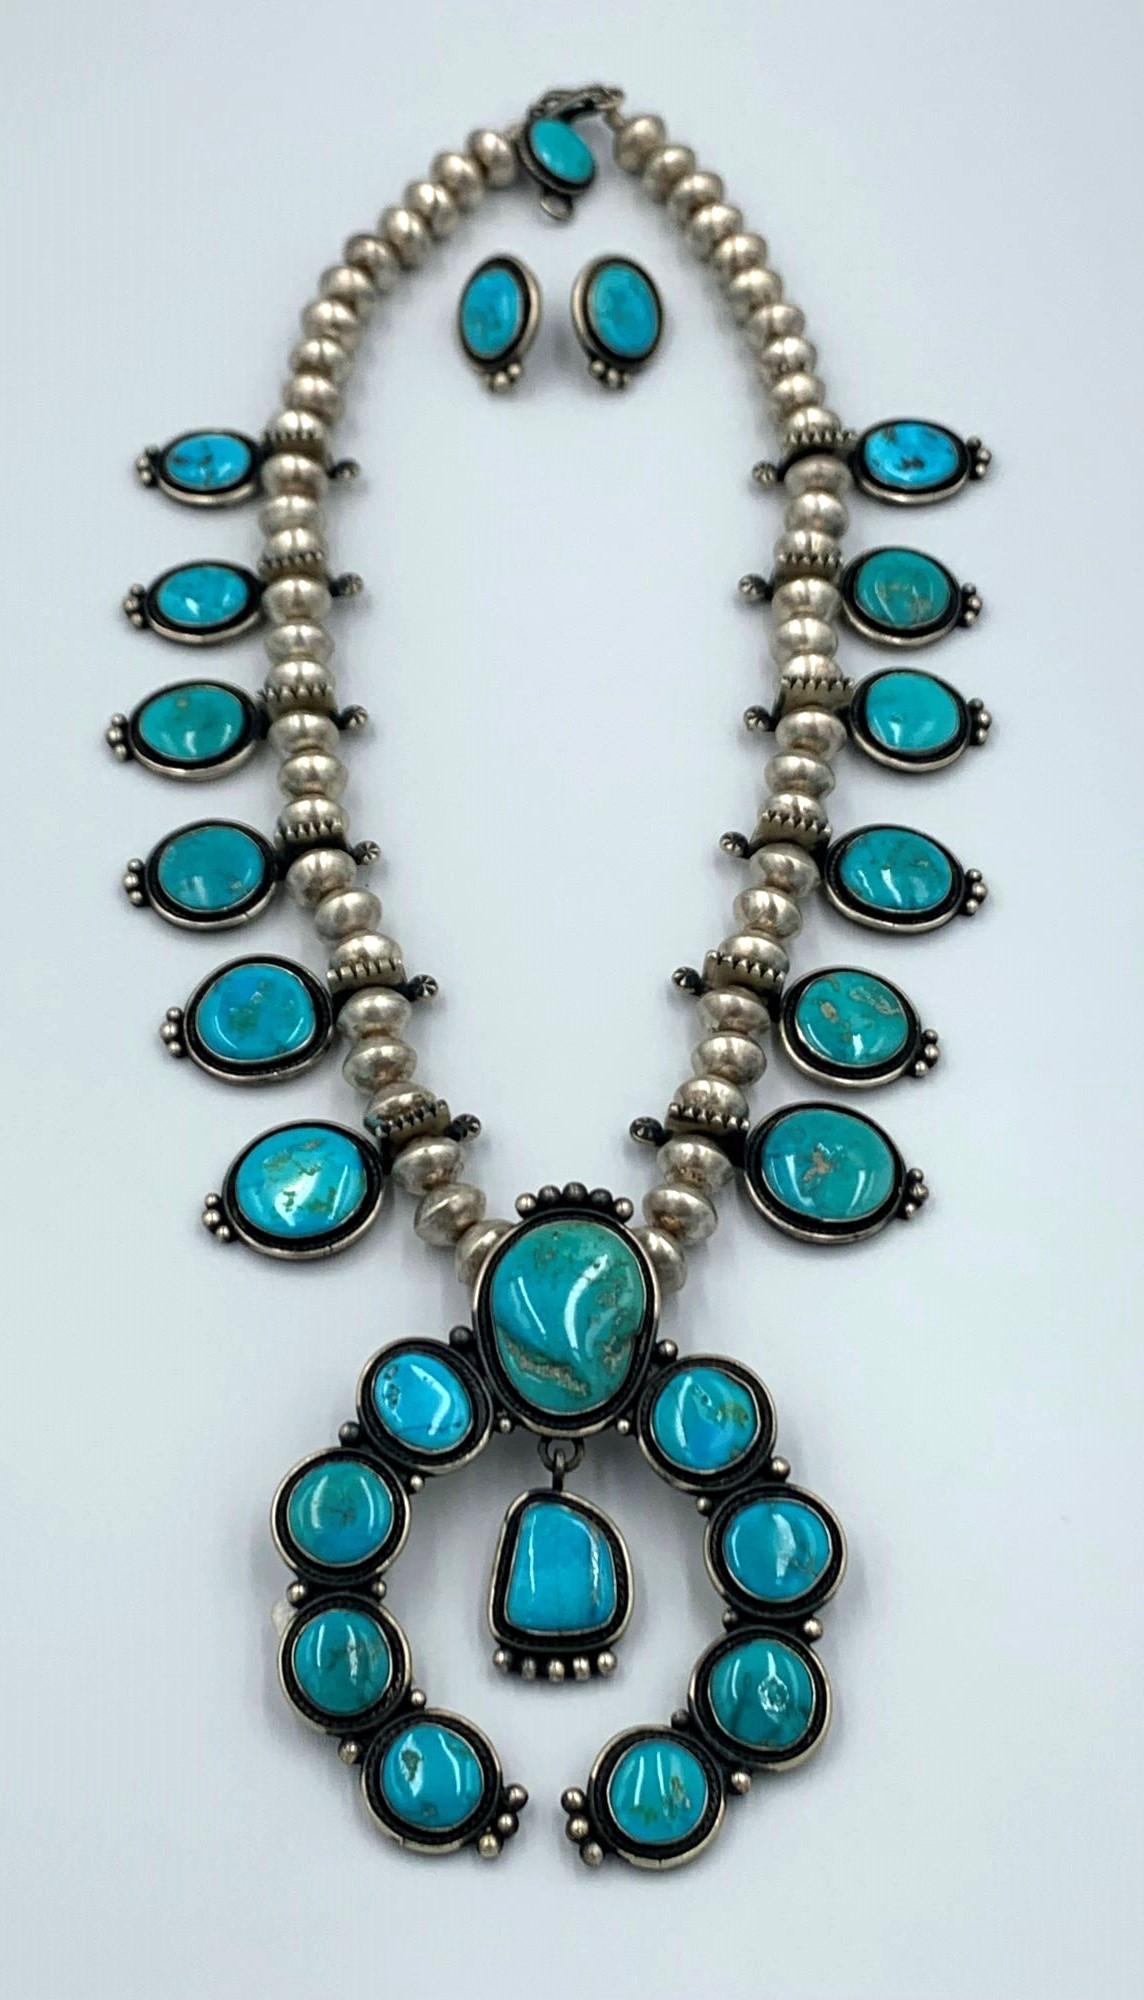 Native American Squash Blossom Necklace Earrings Set by Navajo Silversmith Tommy Jackson For Sale